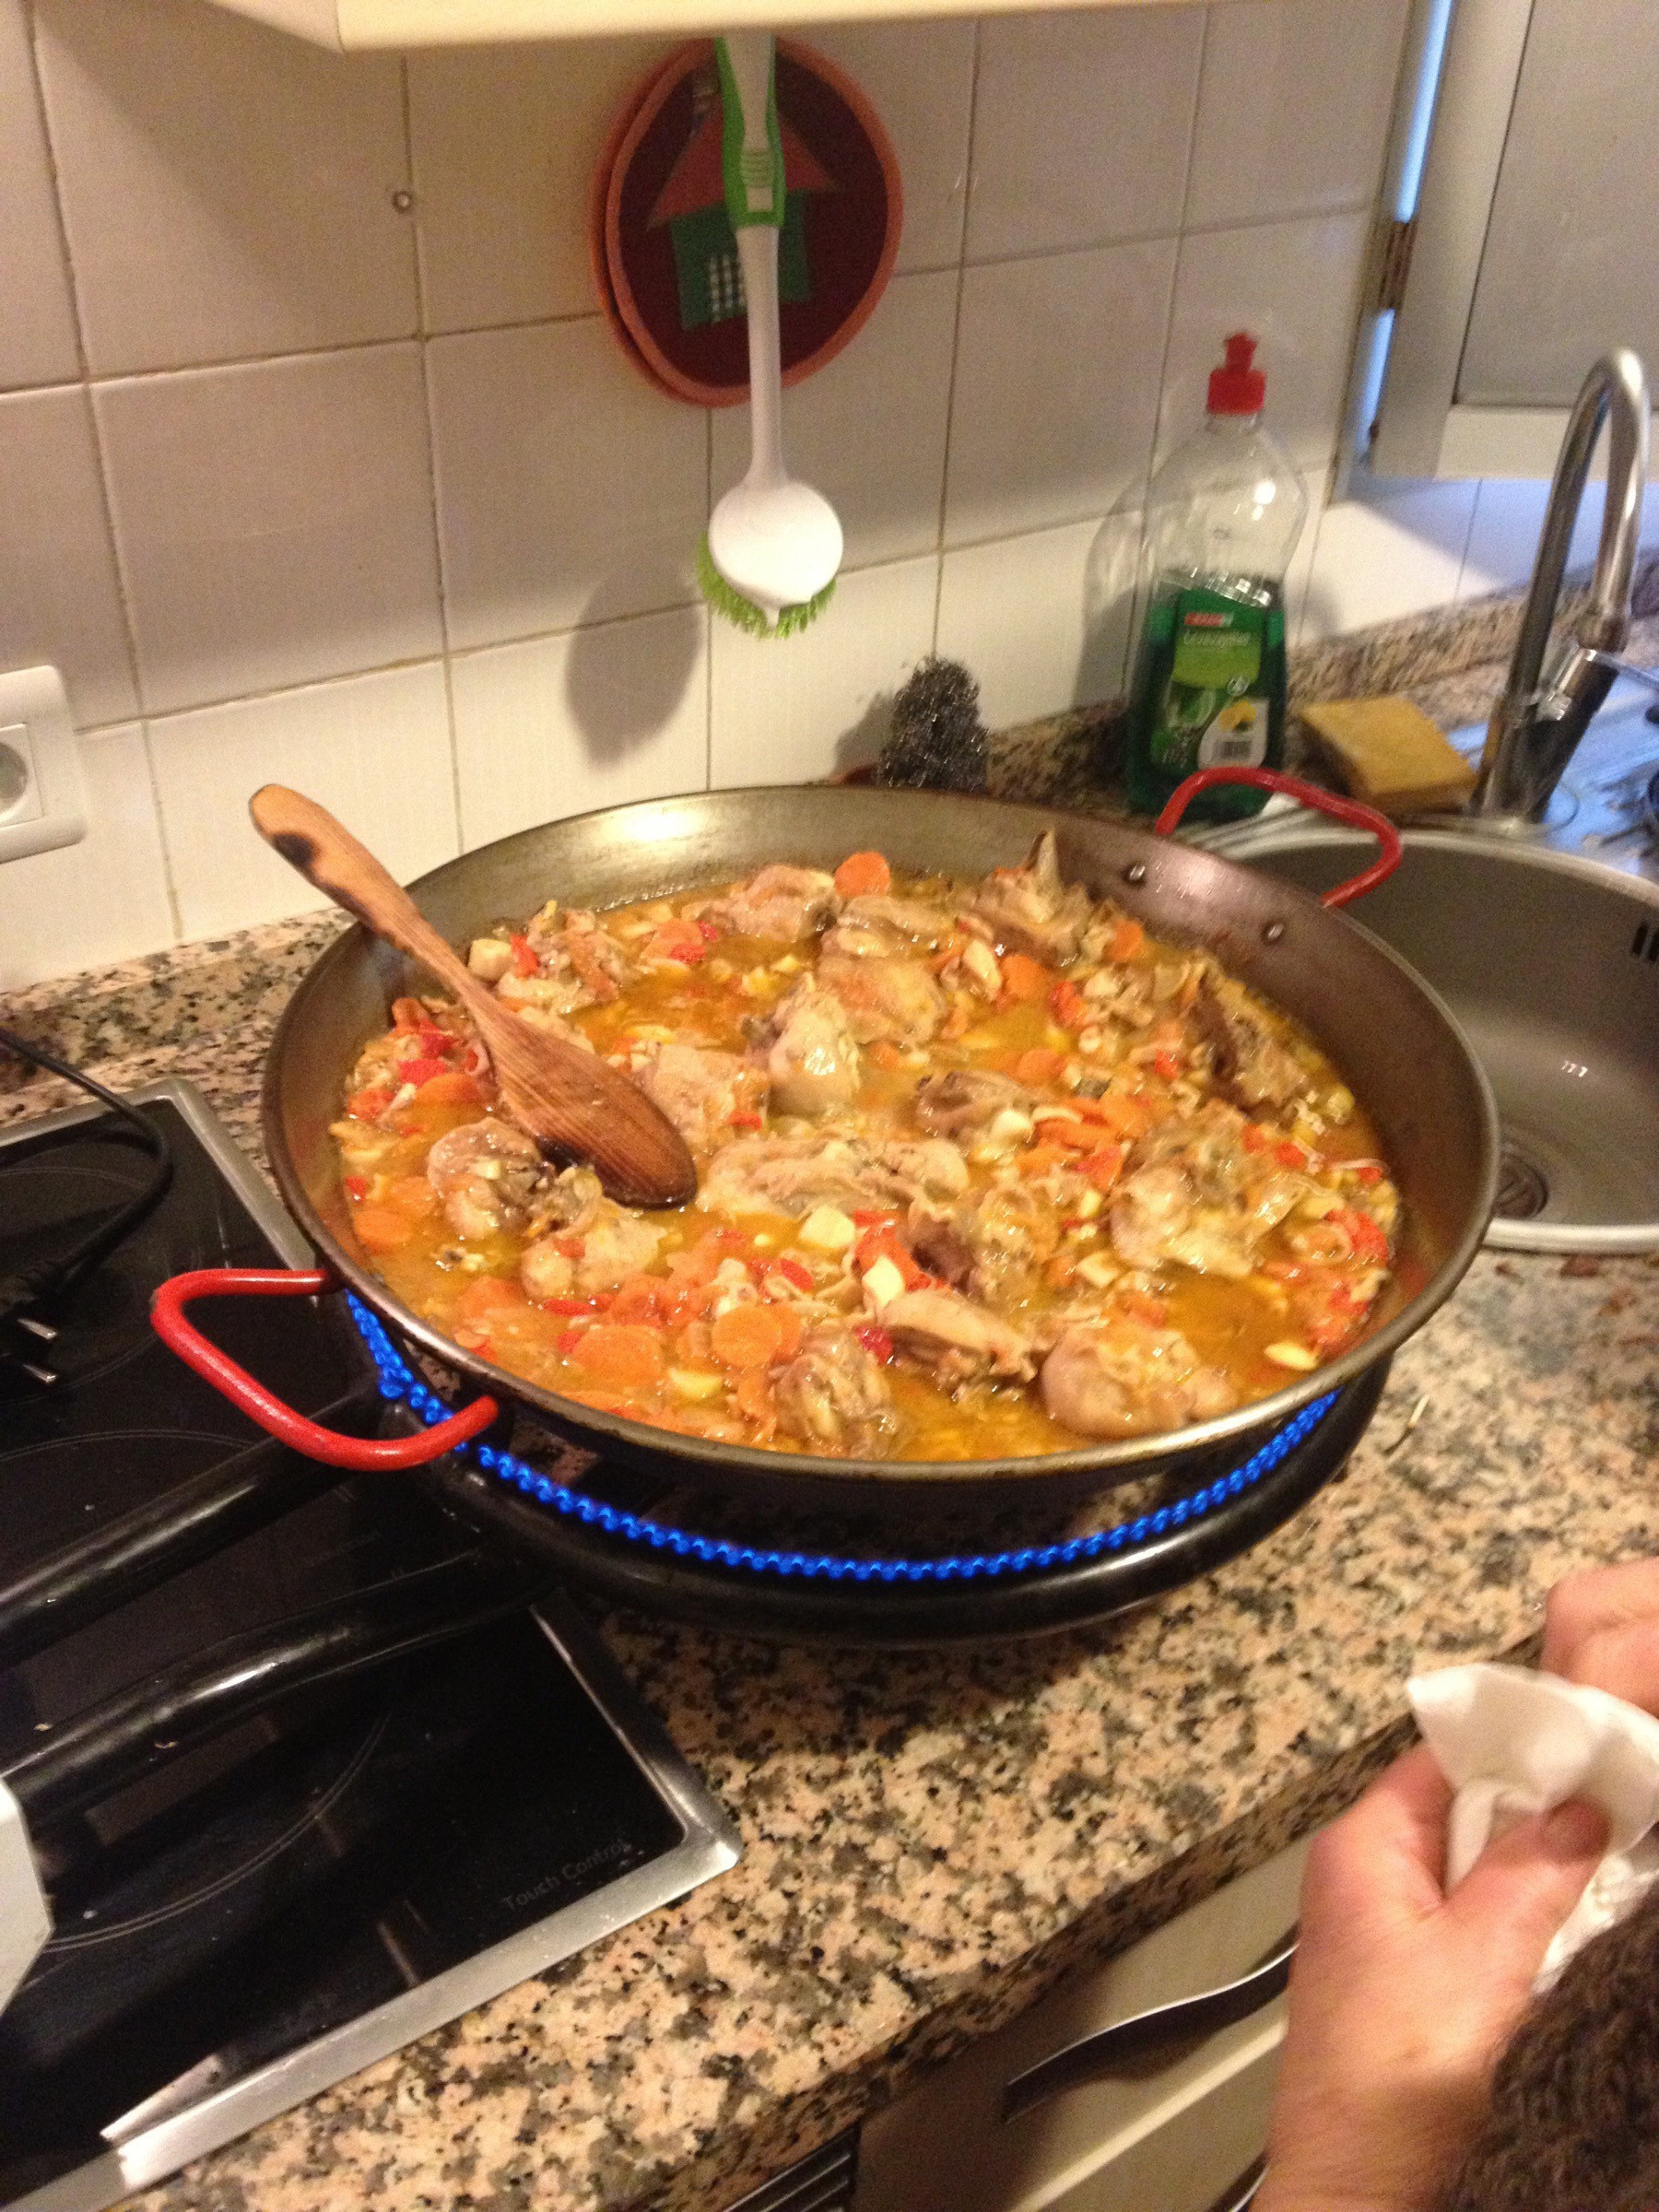 Pan with homemade paella on kitchen counter.